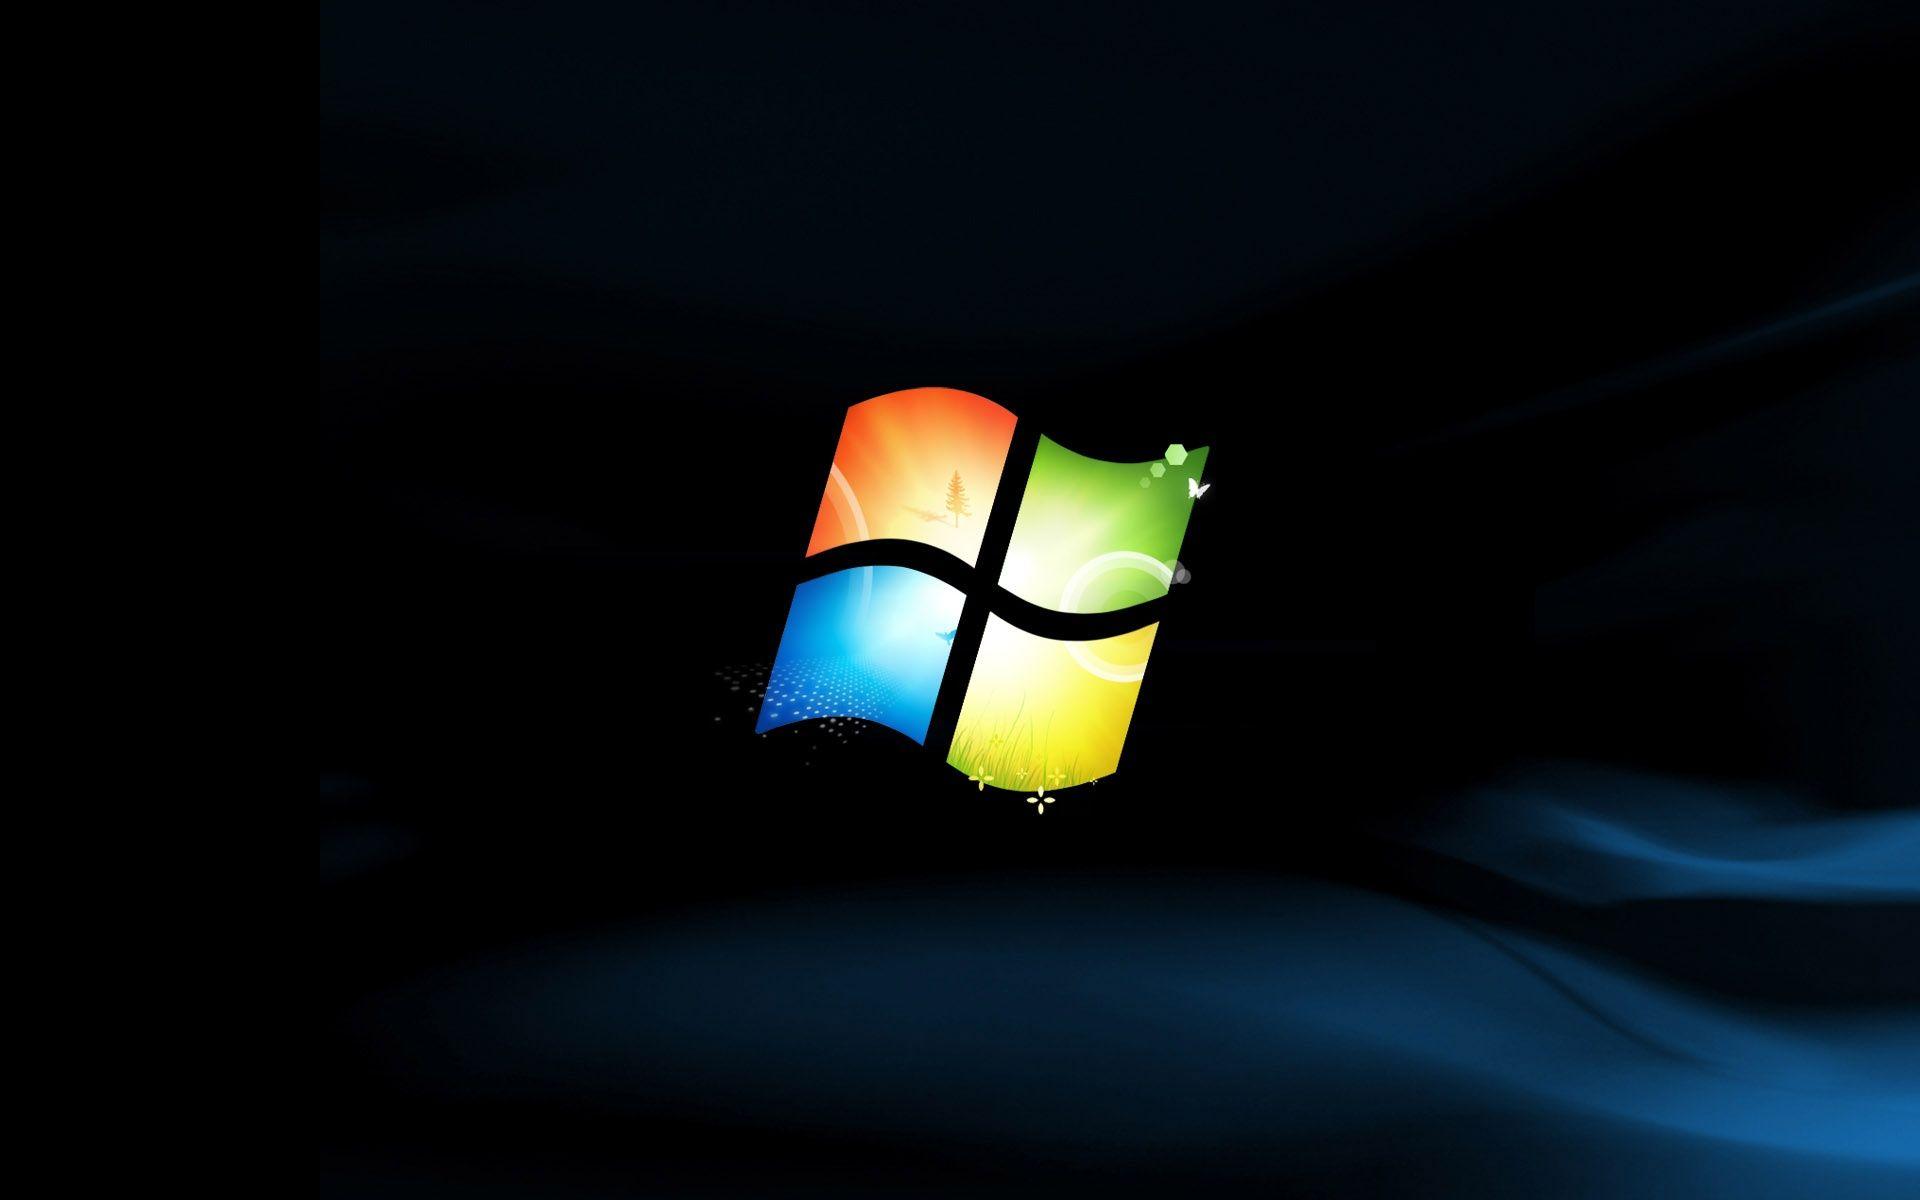 Cool windows wallpapers